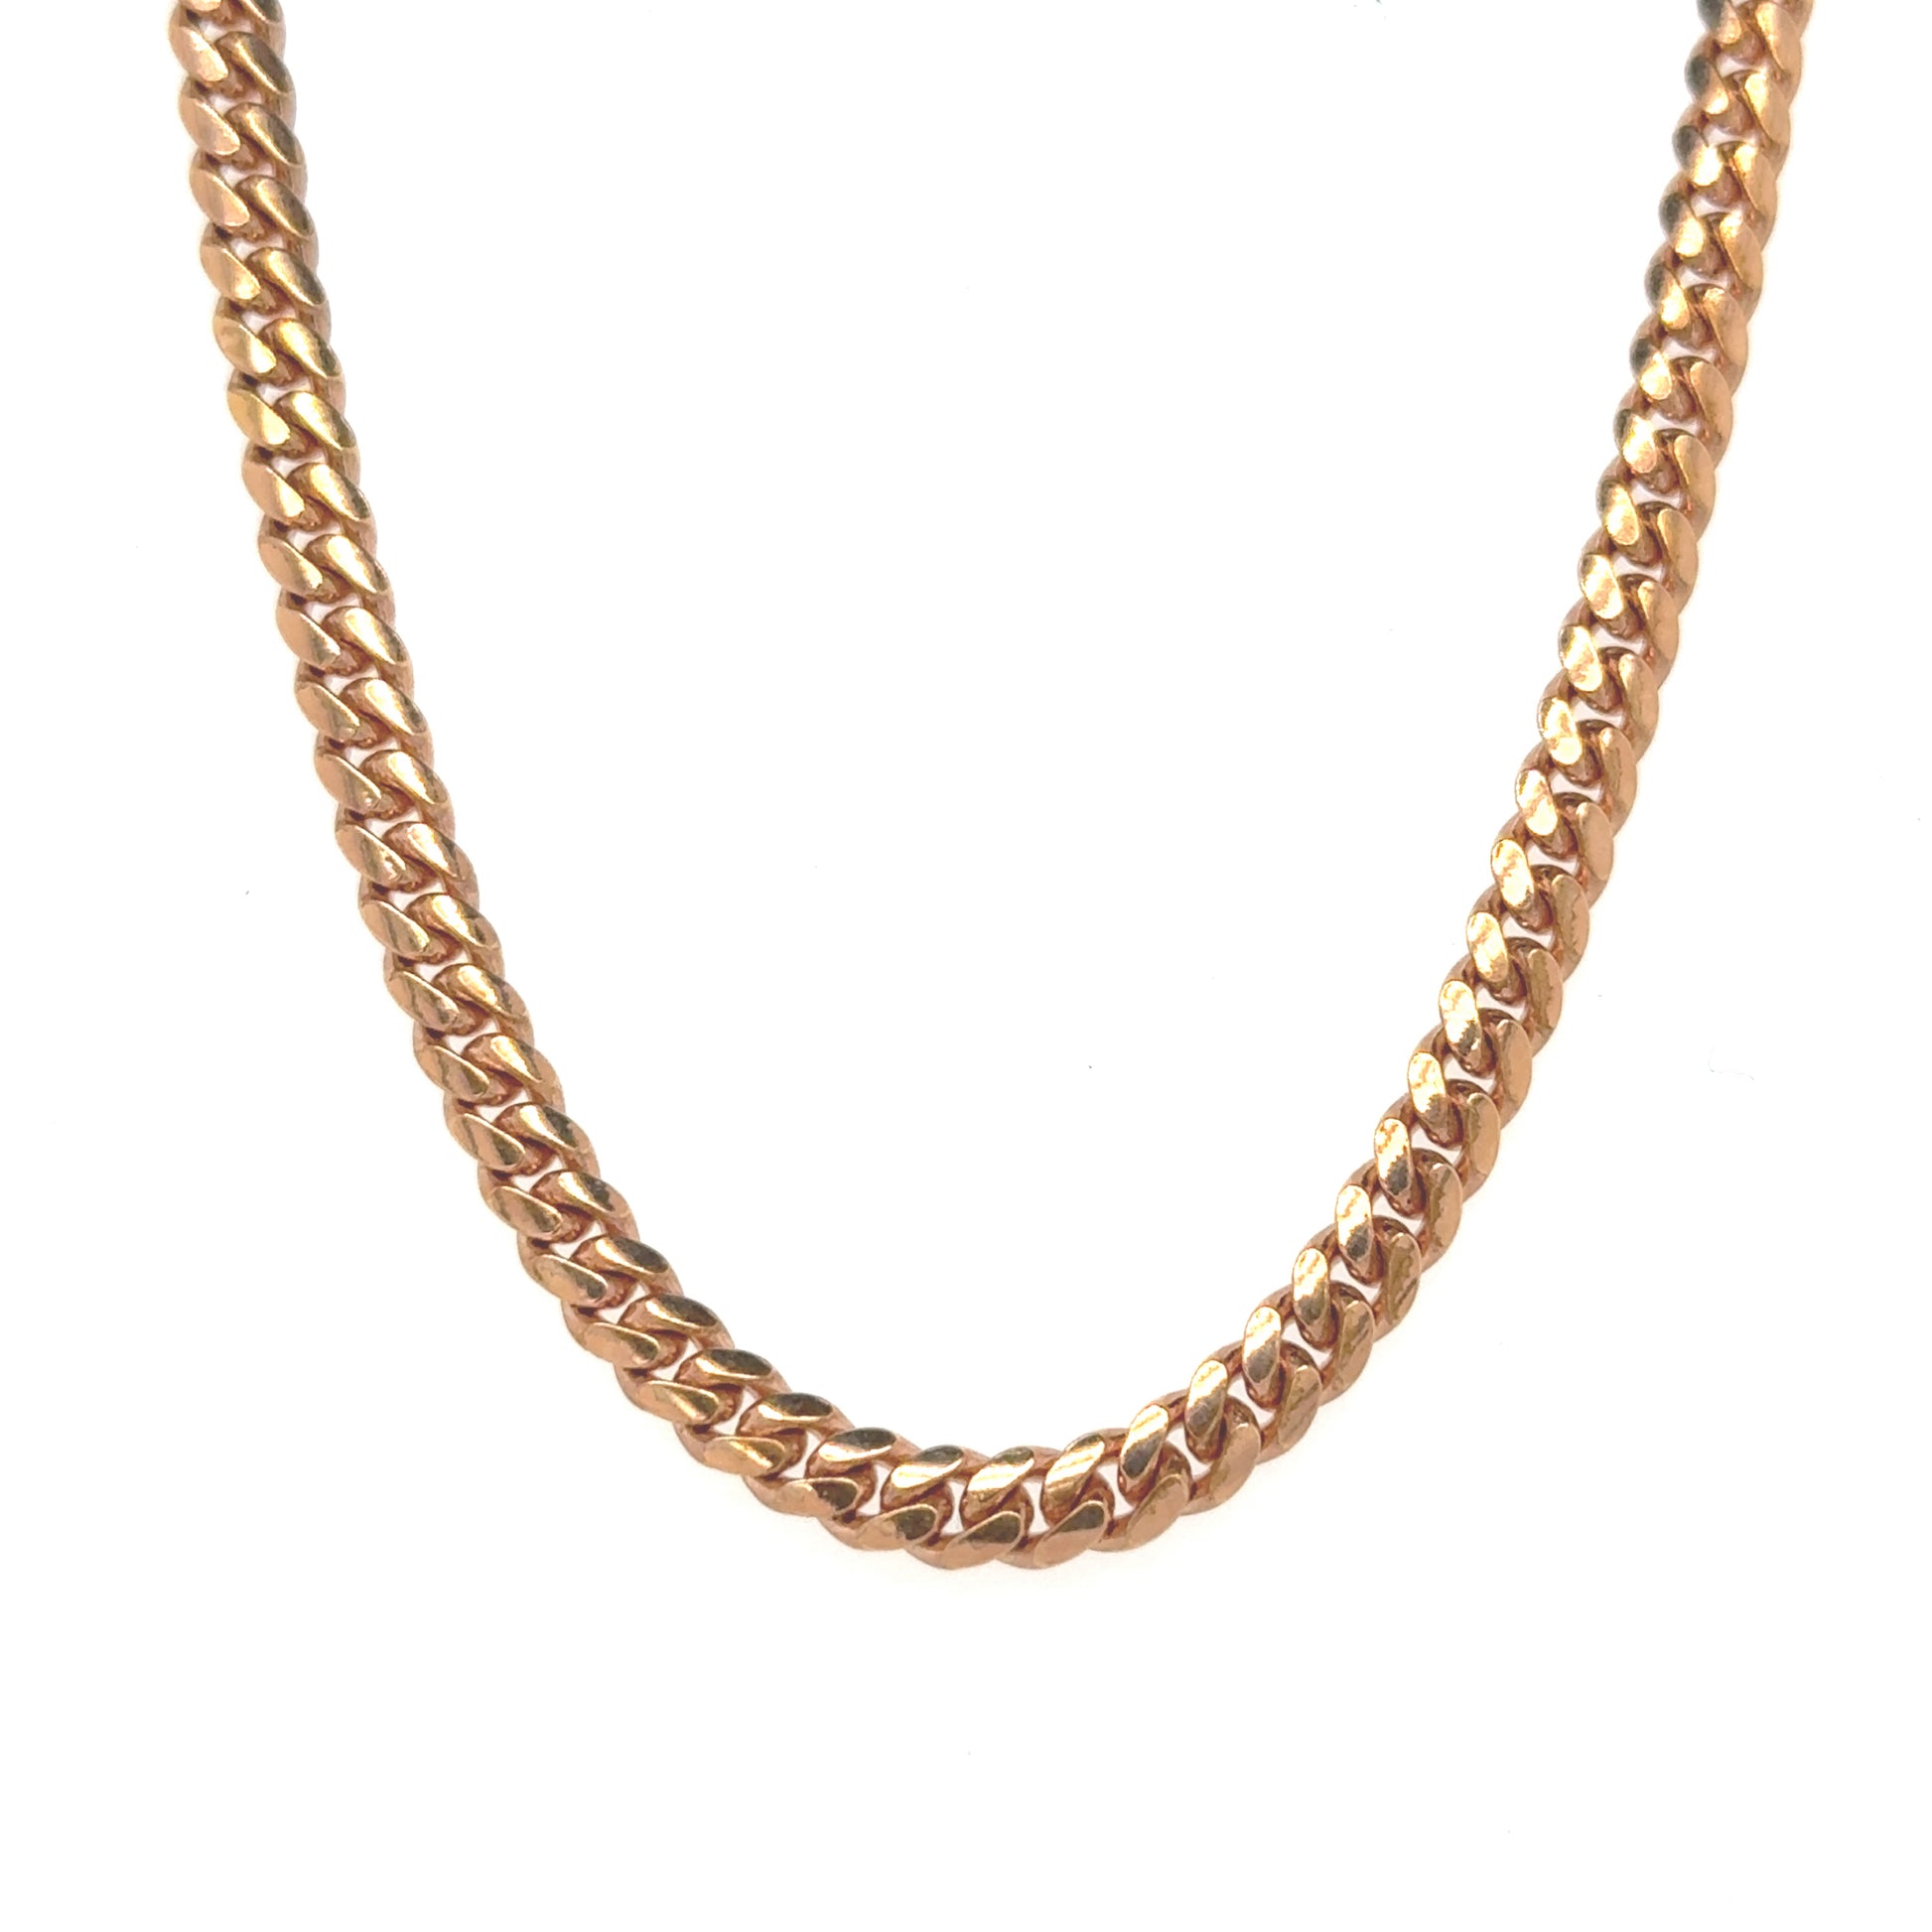 Miami Cuban chain crafted from 10K rose gold, featuring a 4mm width.